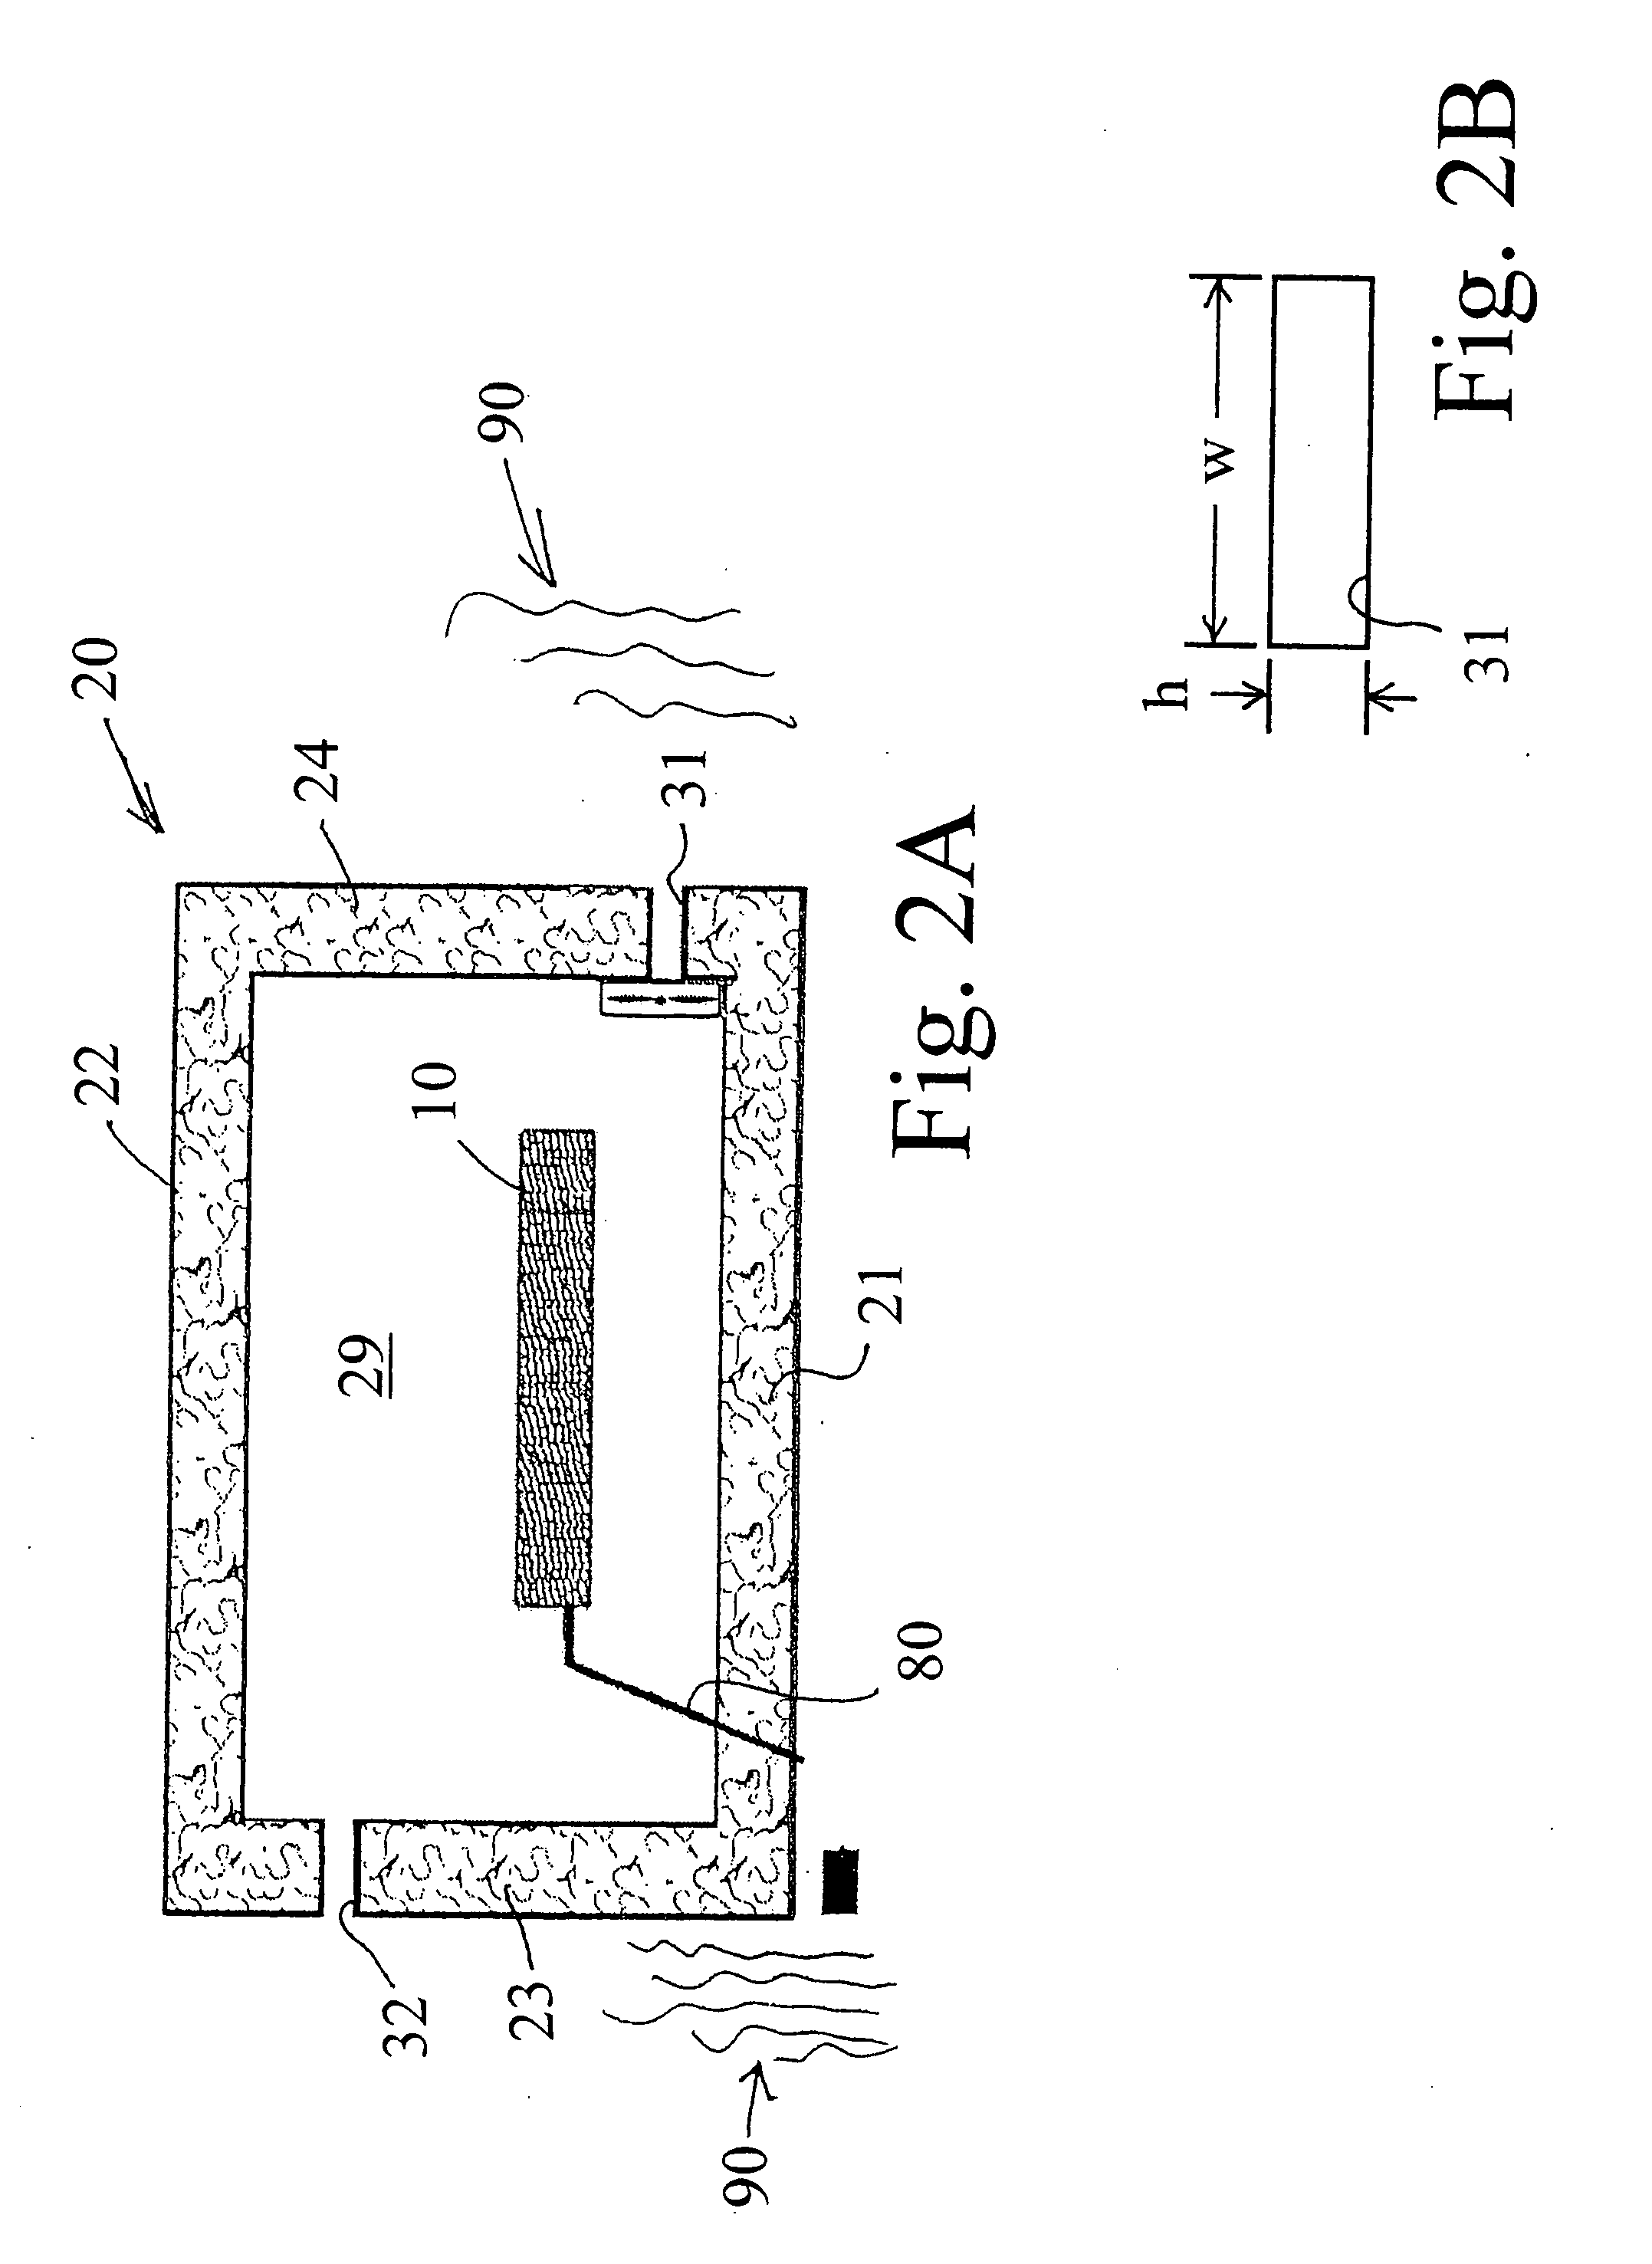 Fire resistant and/or water resistant enclosure for operable computer digital data storage device